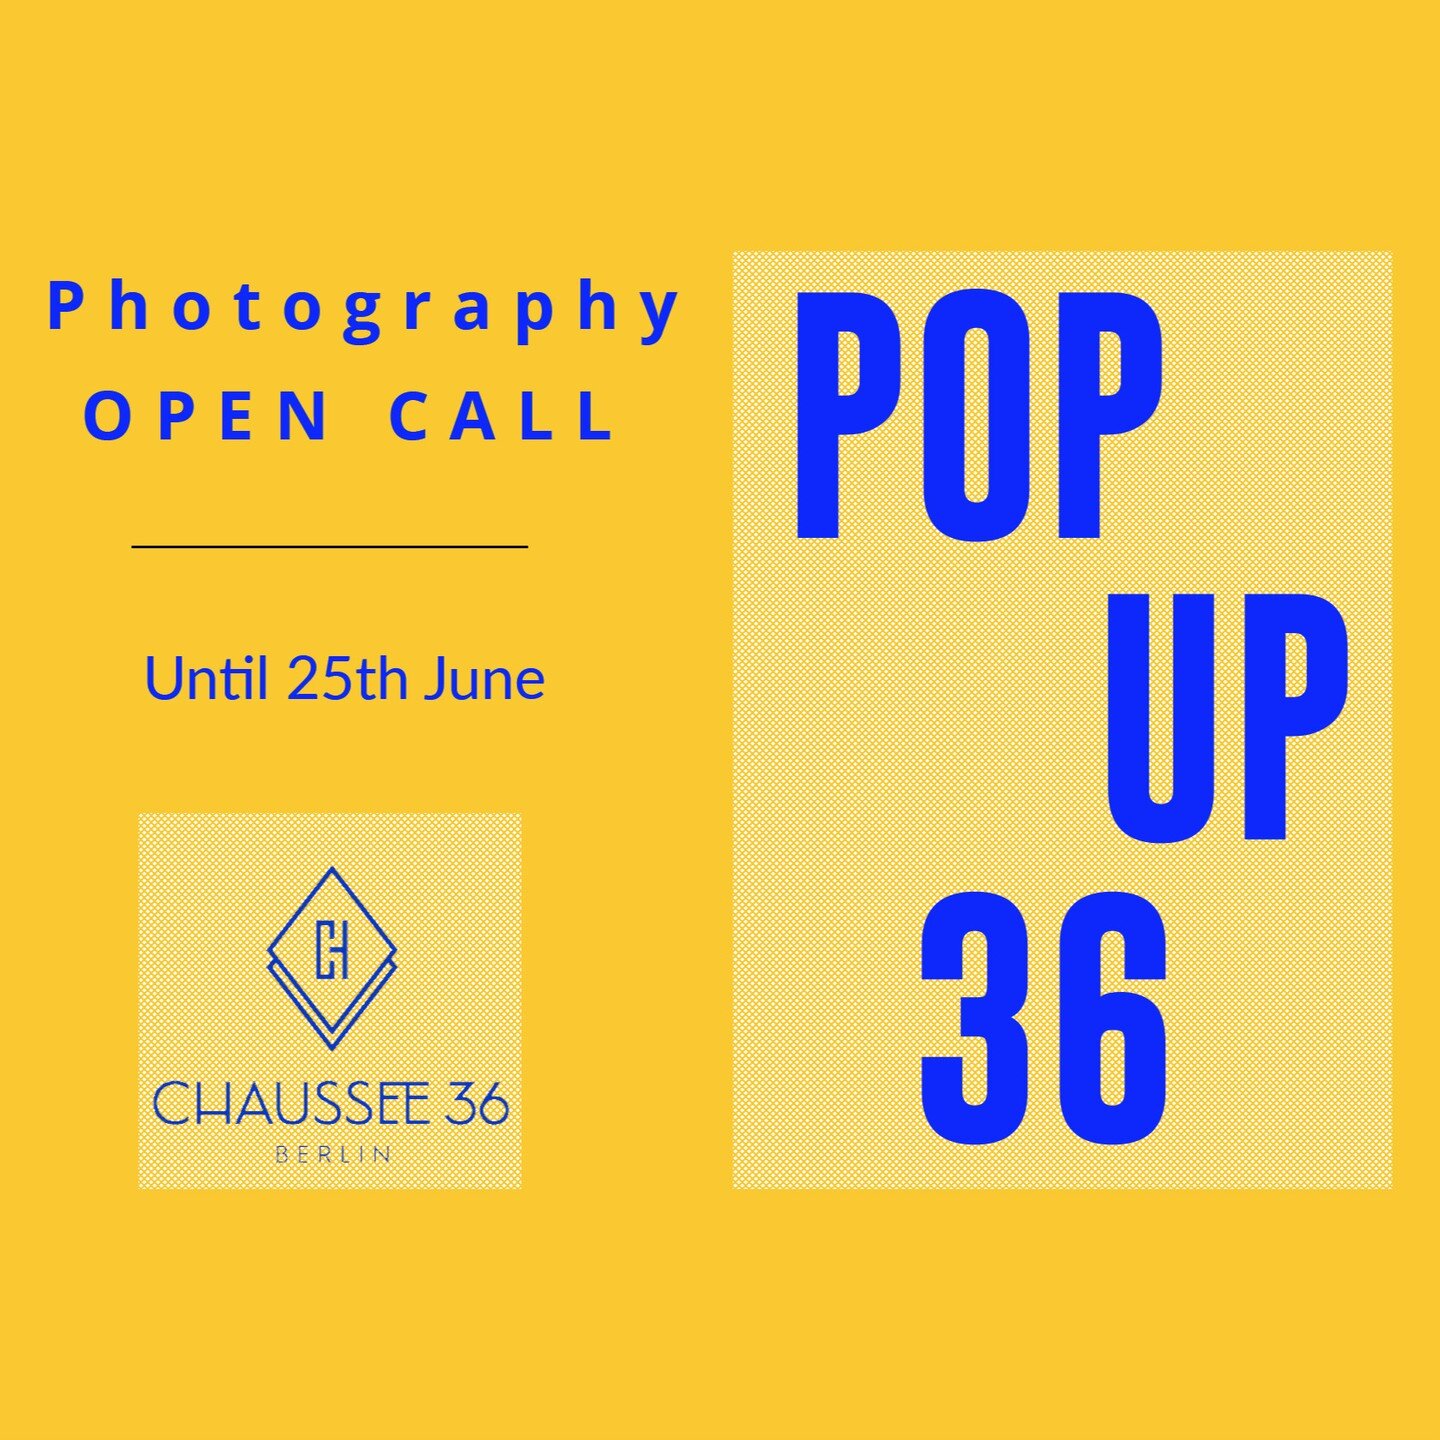 OPEN CALL FOR ALL PHOTOGRAPHERS AND PHOTOGRAPHY COLLECTIVES!

@popup.36 is initiating an open call for all photographers/ photography collectives to host an Exhibition during the Weekend of 07.07.-09.07.2023 in our POP UP Exhibition space! Submission